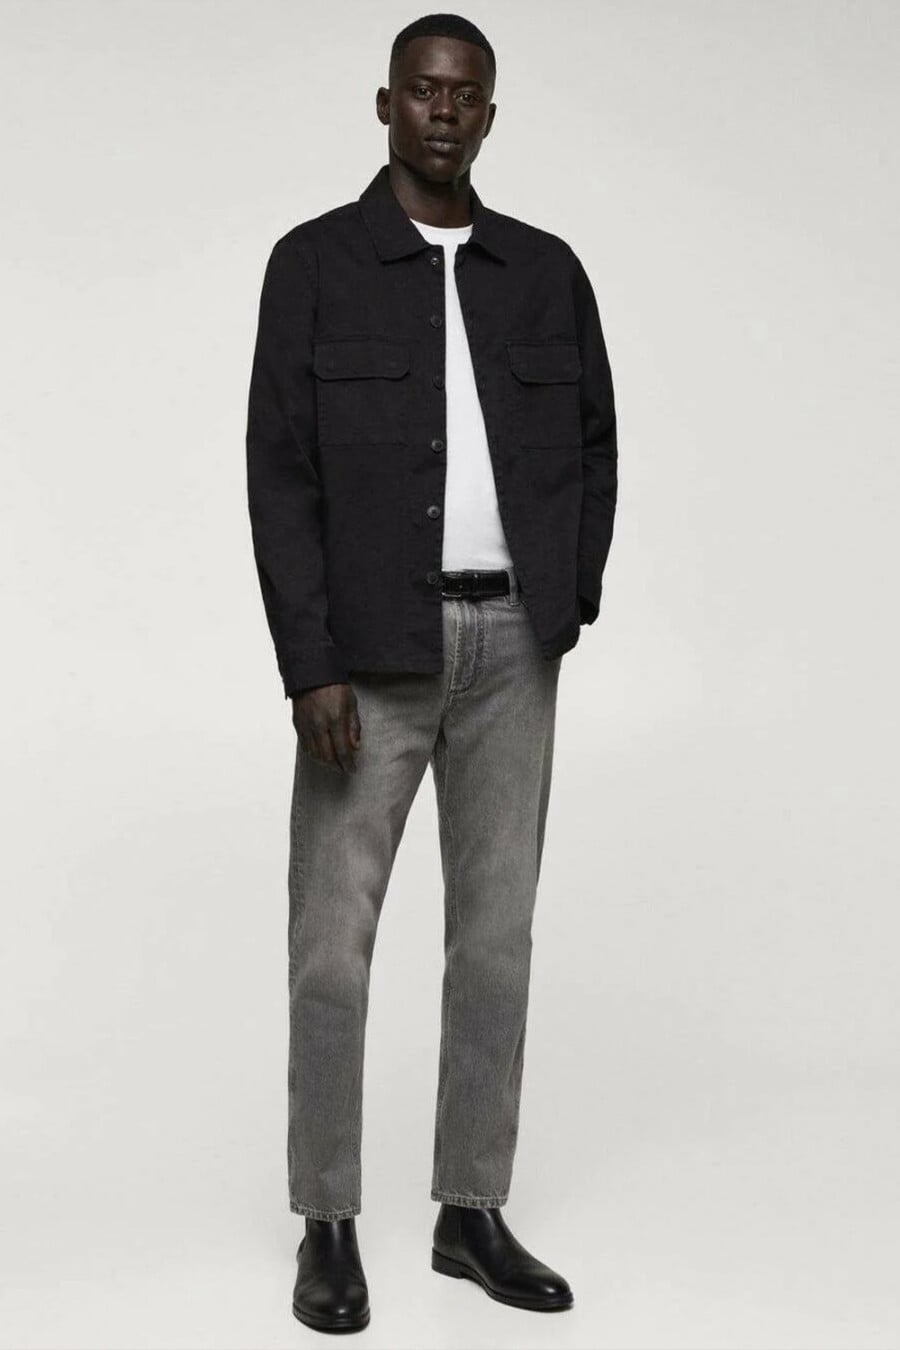 Men's dark grey jeans, white T-shirt, black overshirt and black leather Chelsea boots outfit